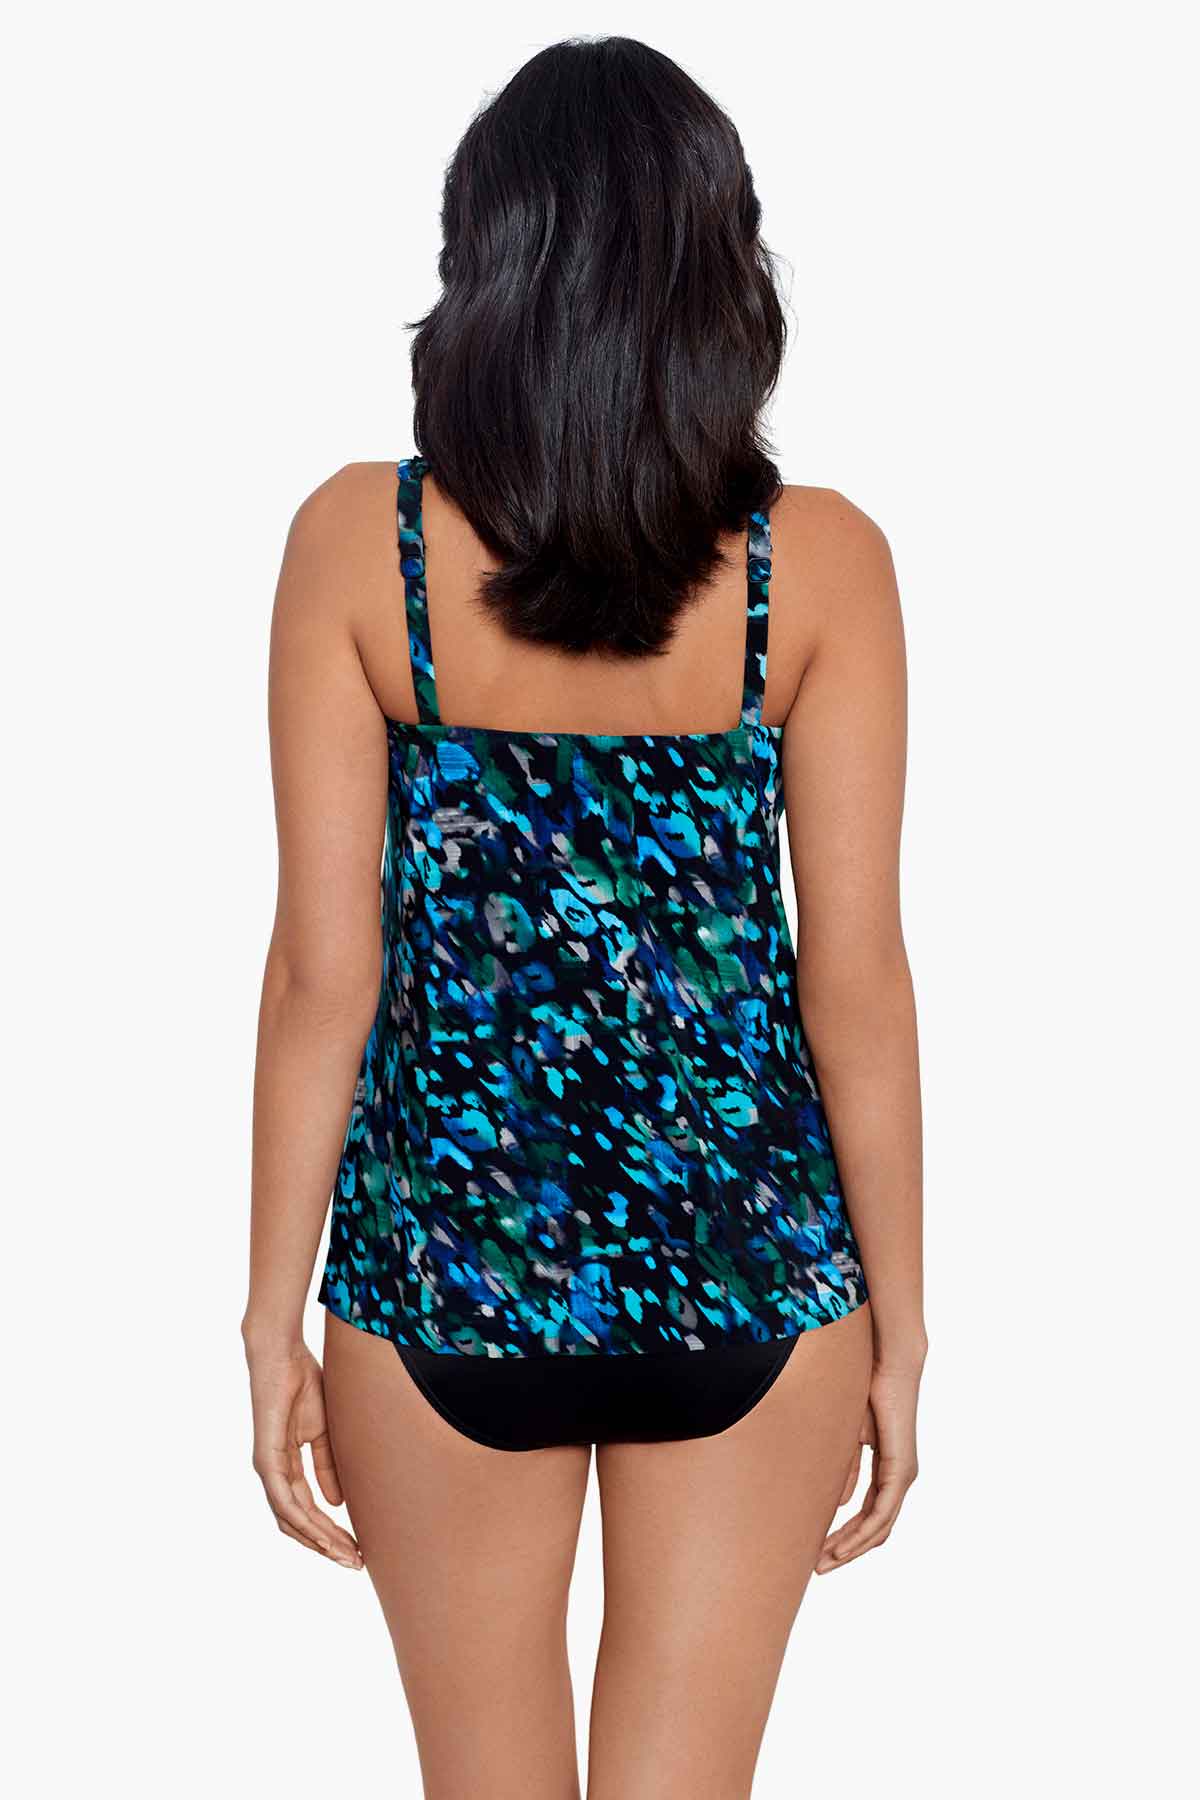 Dreamsuit by Miracle Brands Floral Print Women Swimsuit Tankini Top 1 CT,  Size 8